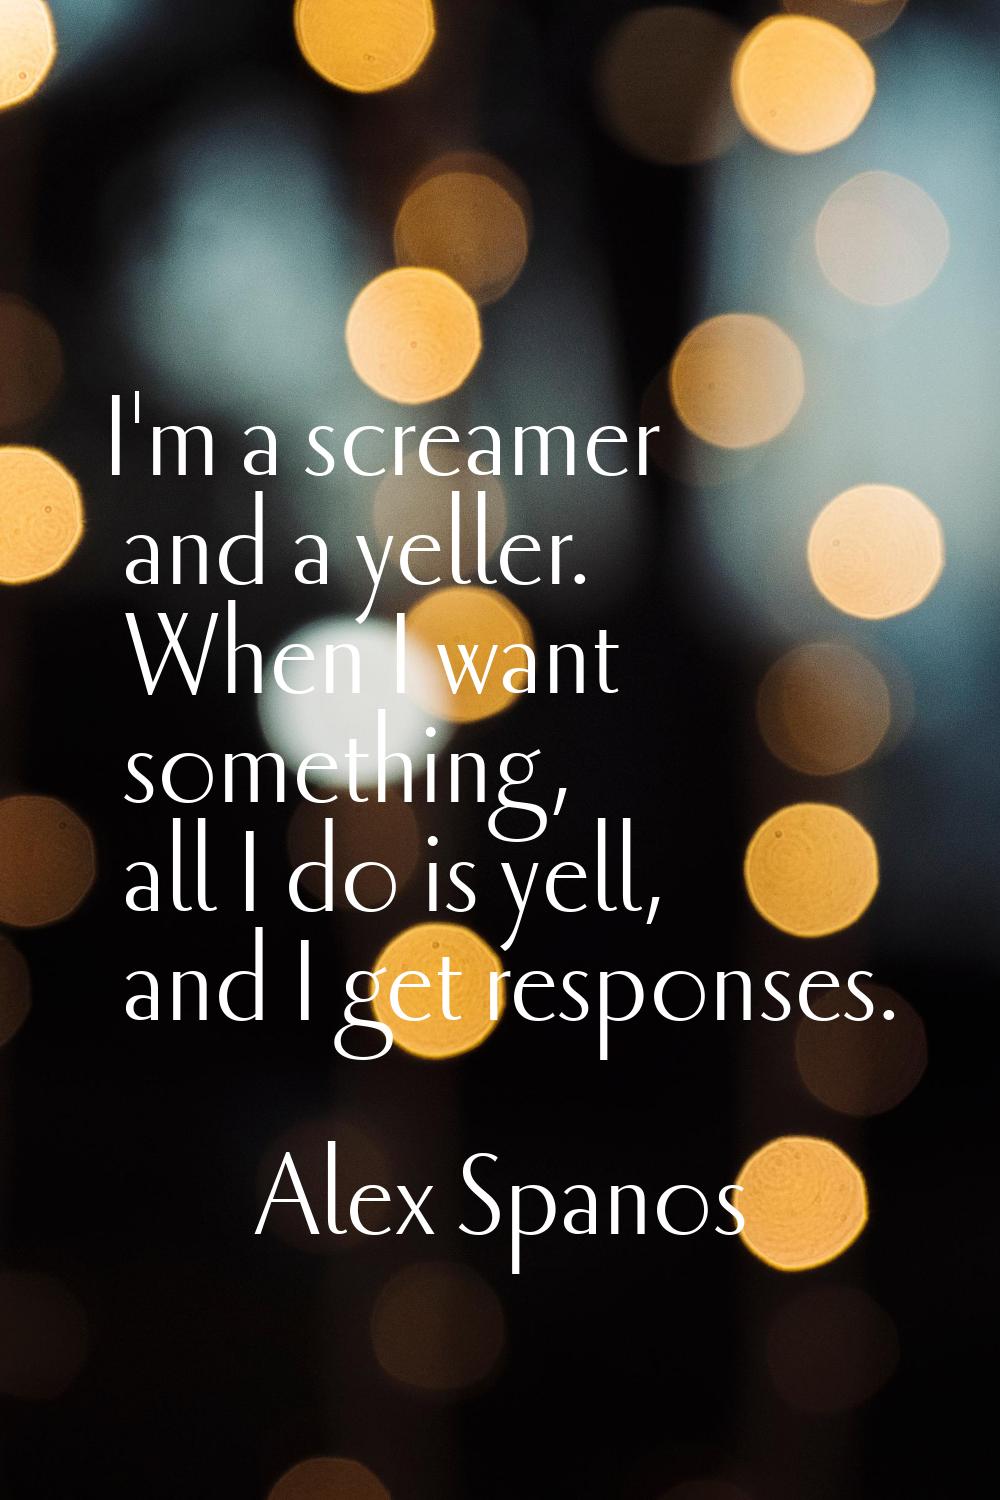 I'm a screamer and a yeller. When I want something, all I do is yell, and I get responses.